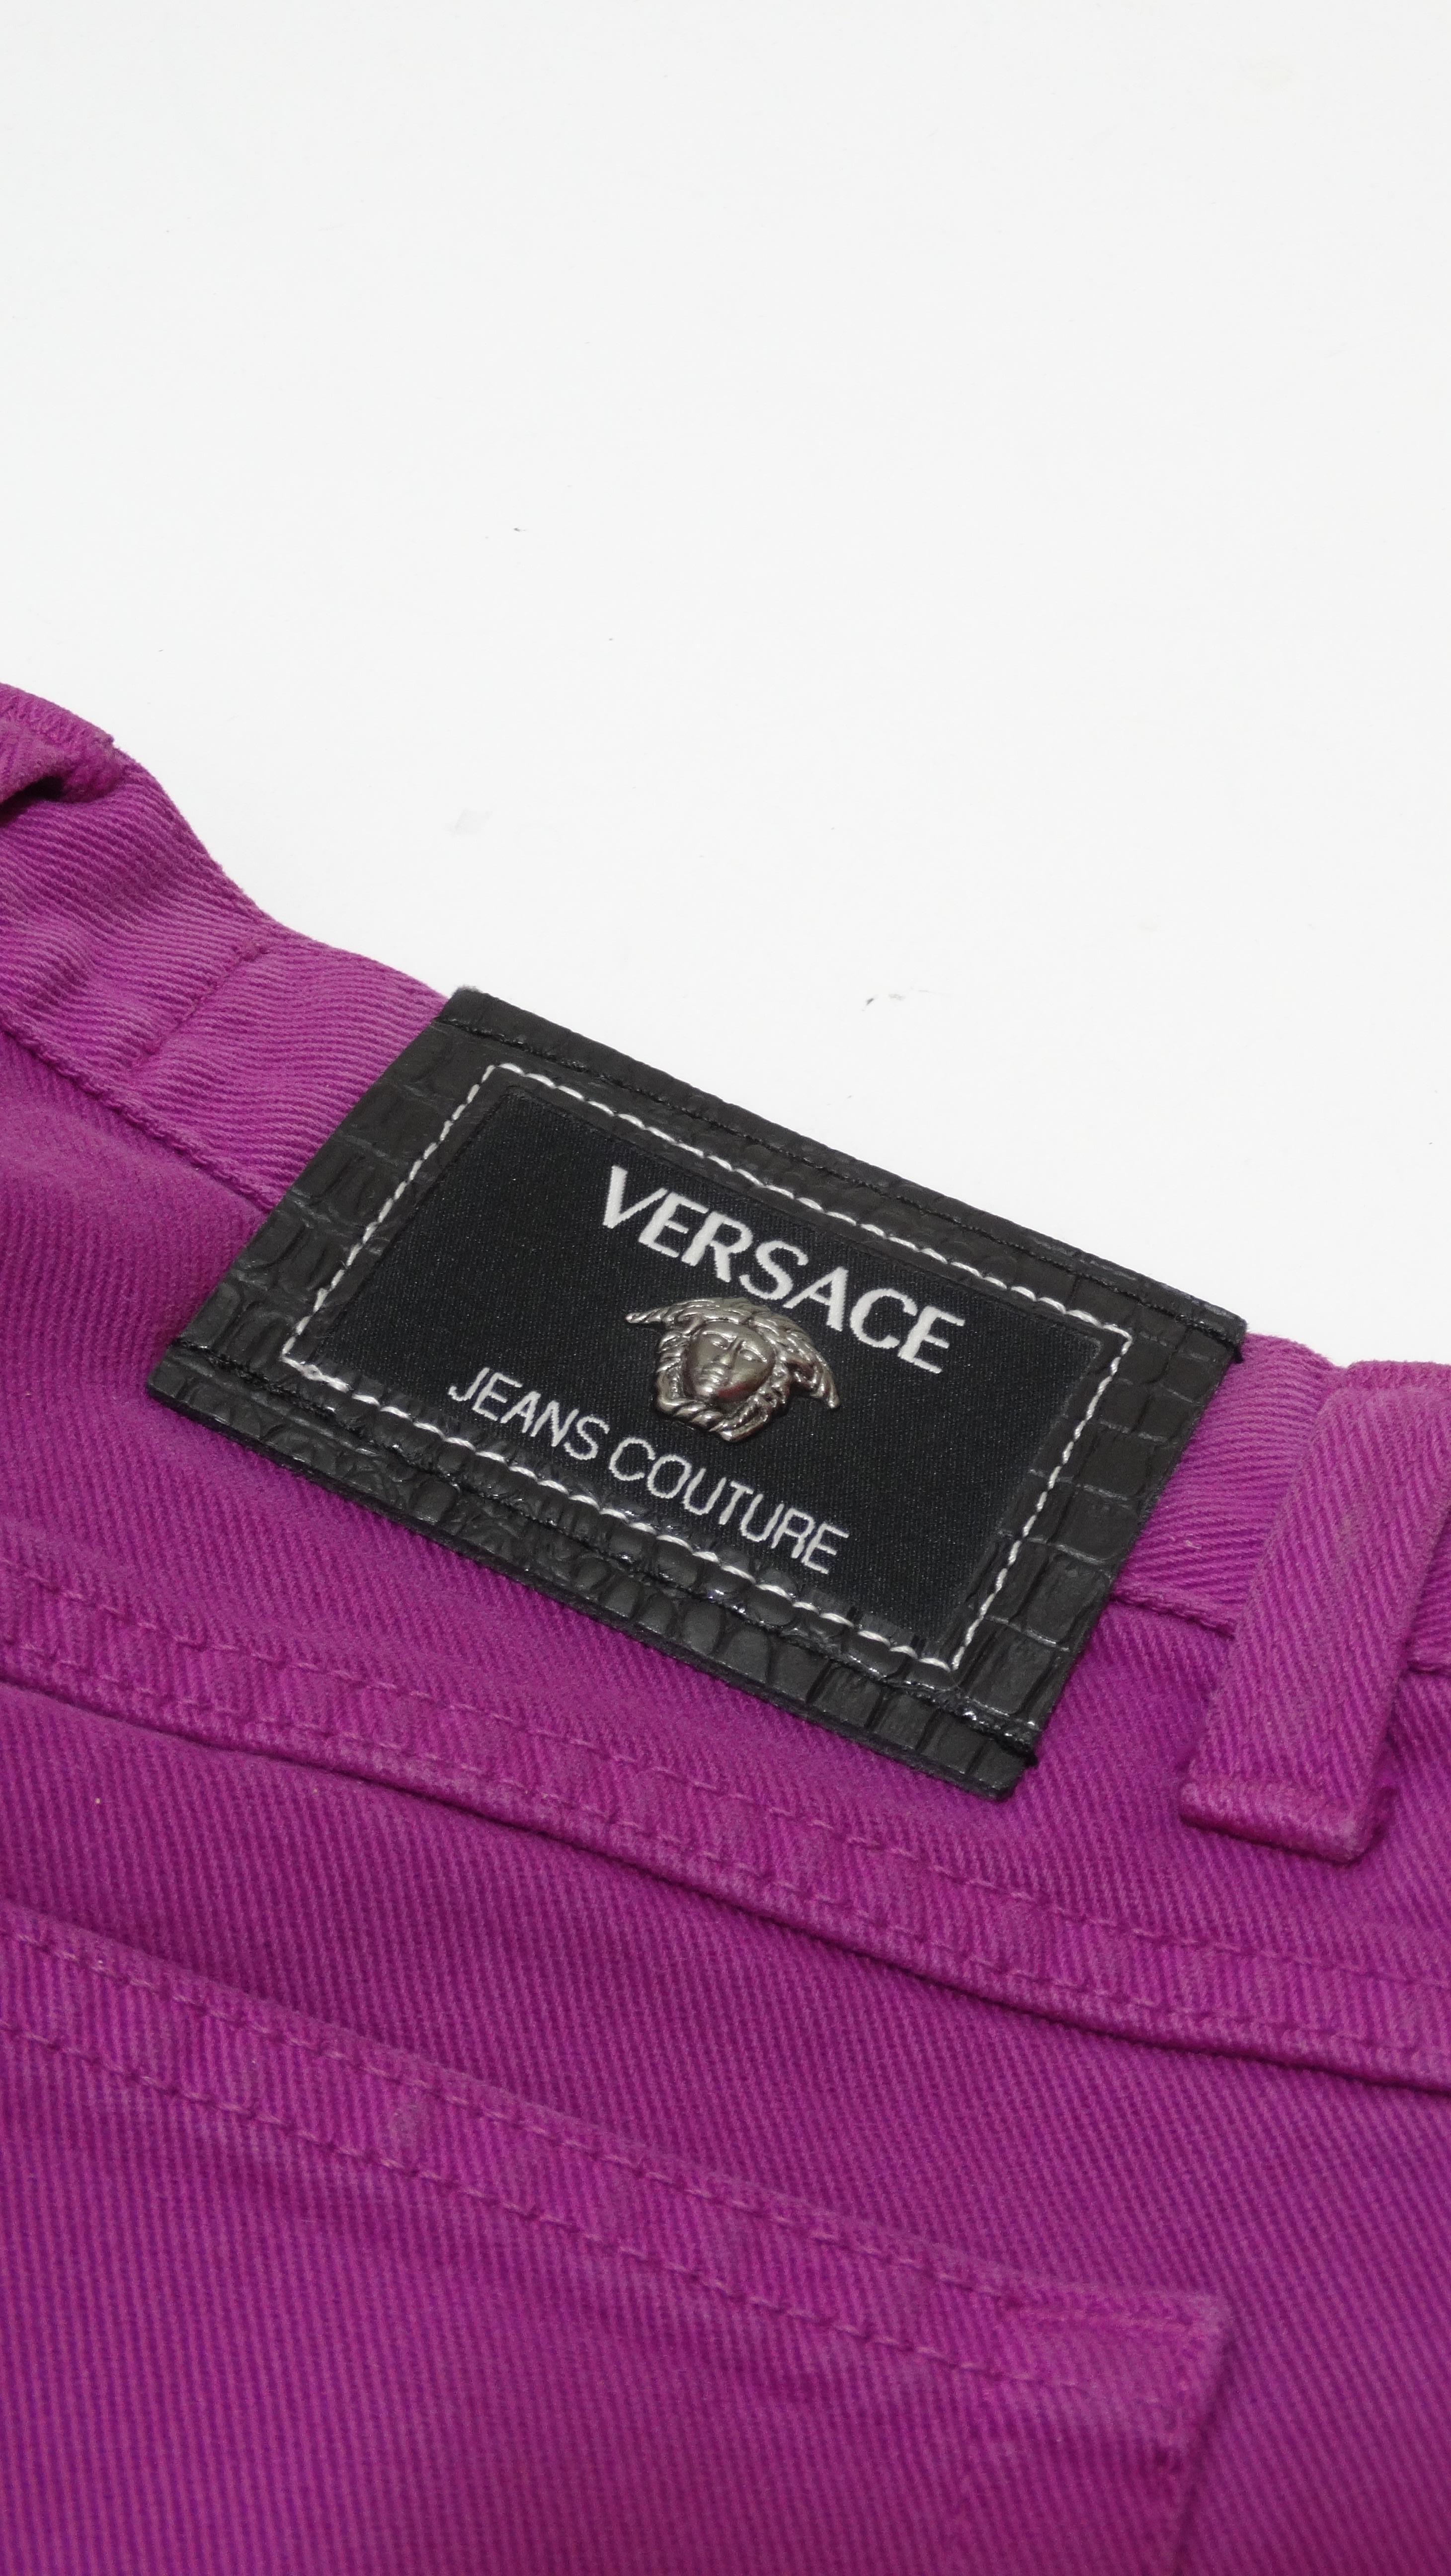 Versace Jeans Couture 1990er Jahre lila Jeans  im Angebot 2